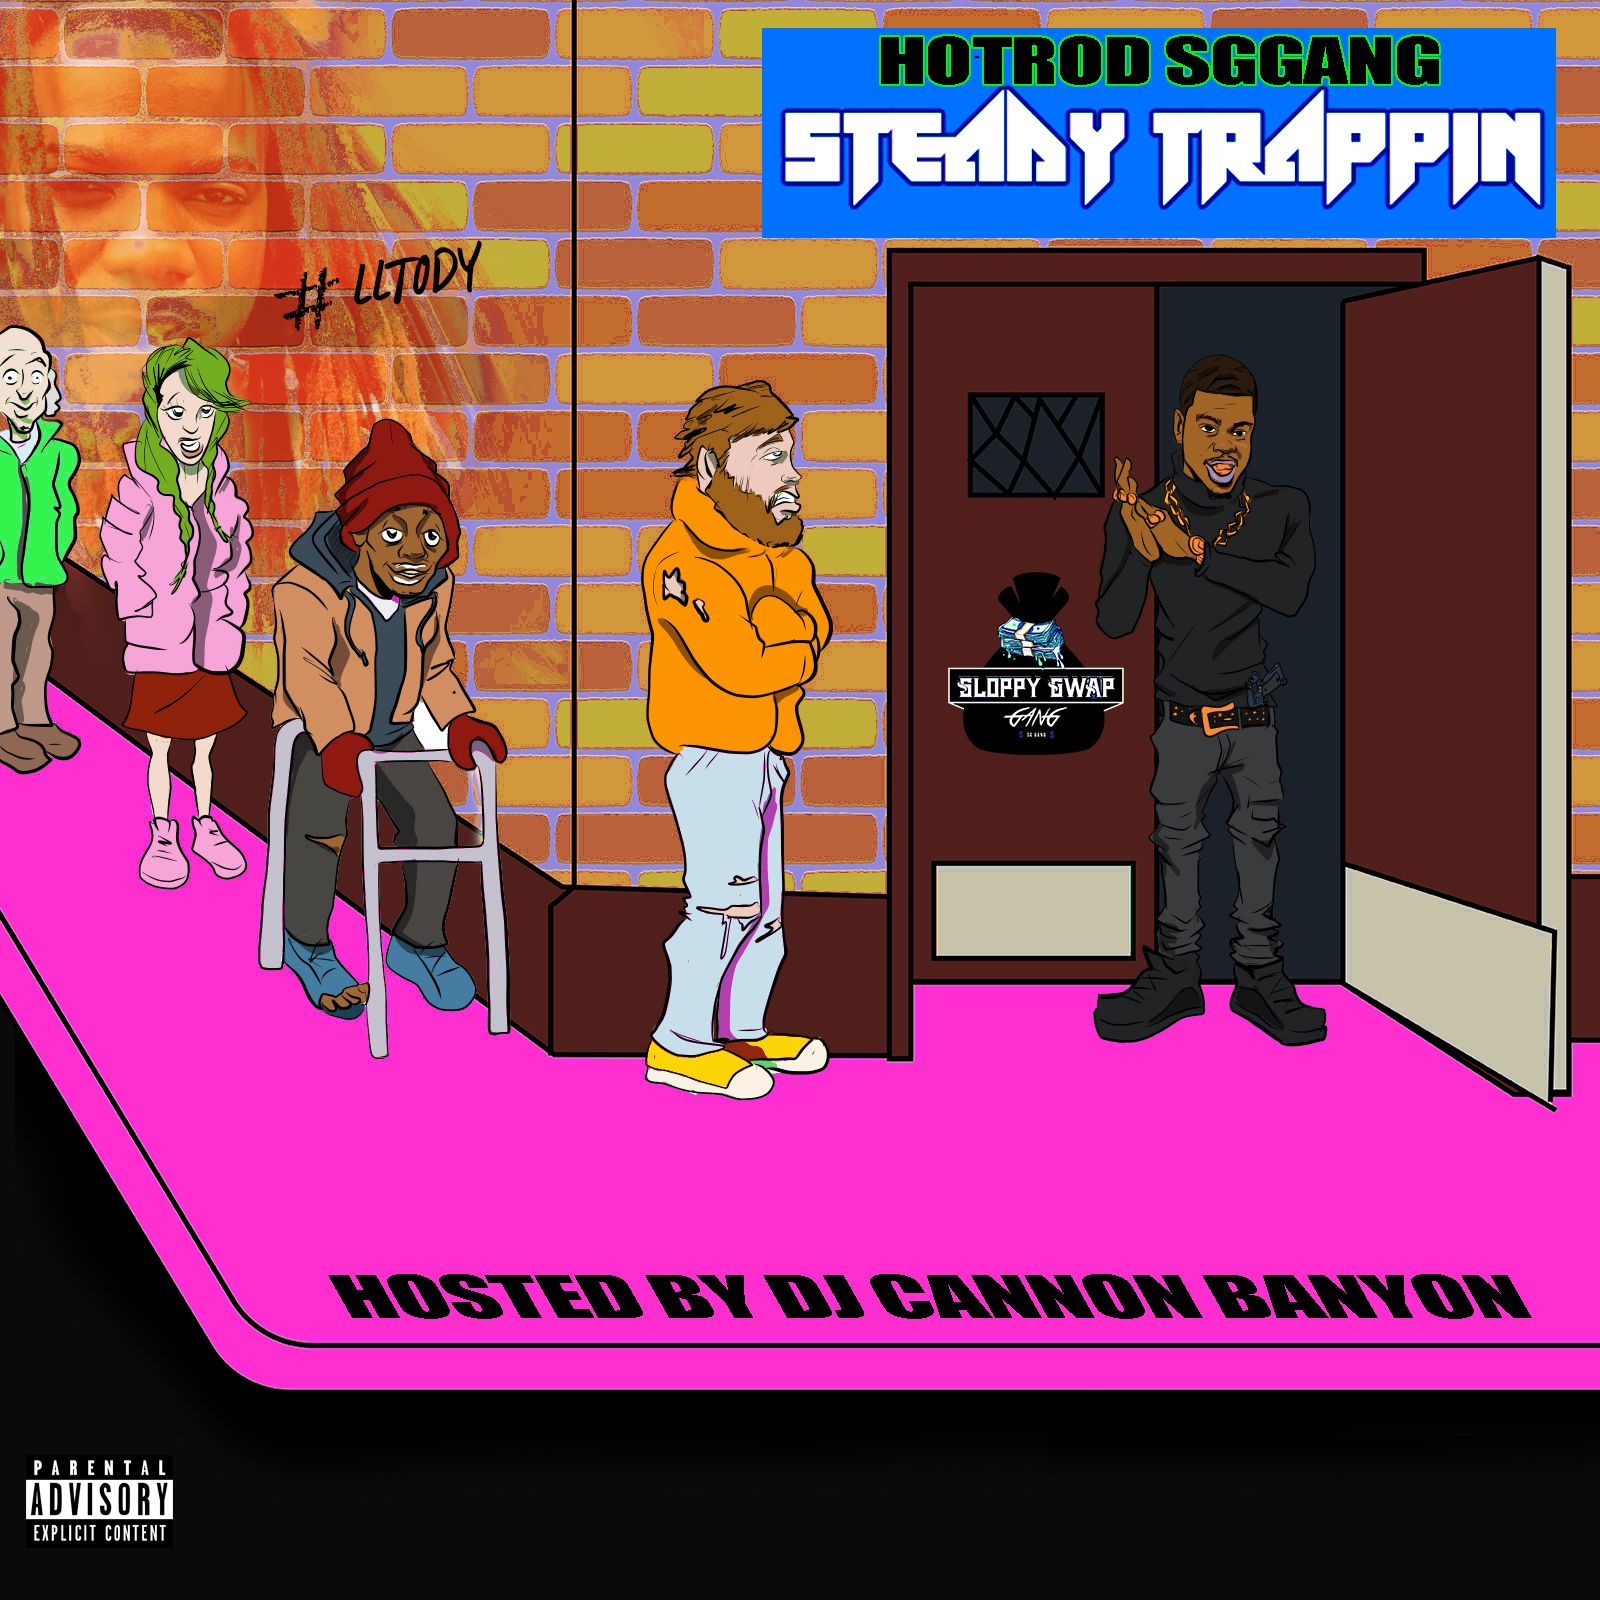 HotRod SgGang - Steady Trappin Cover Art